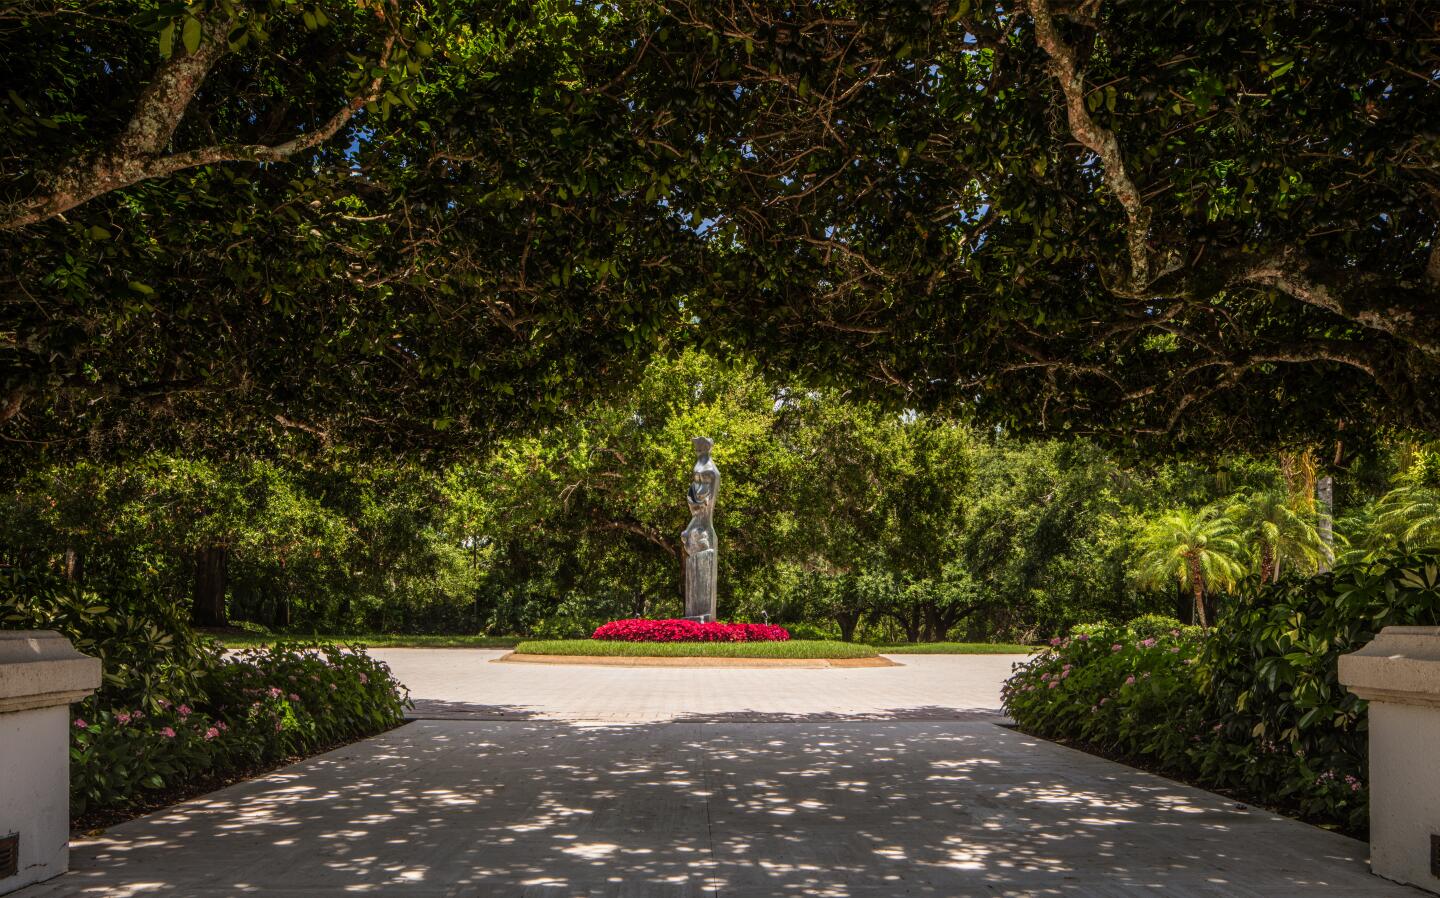 A statue surrounded by flowers is at the center of the circular driveway.